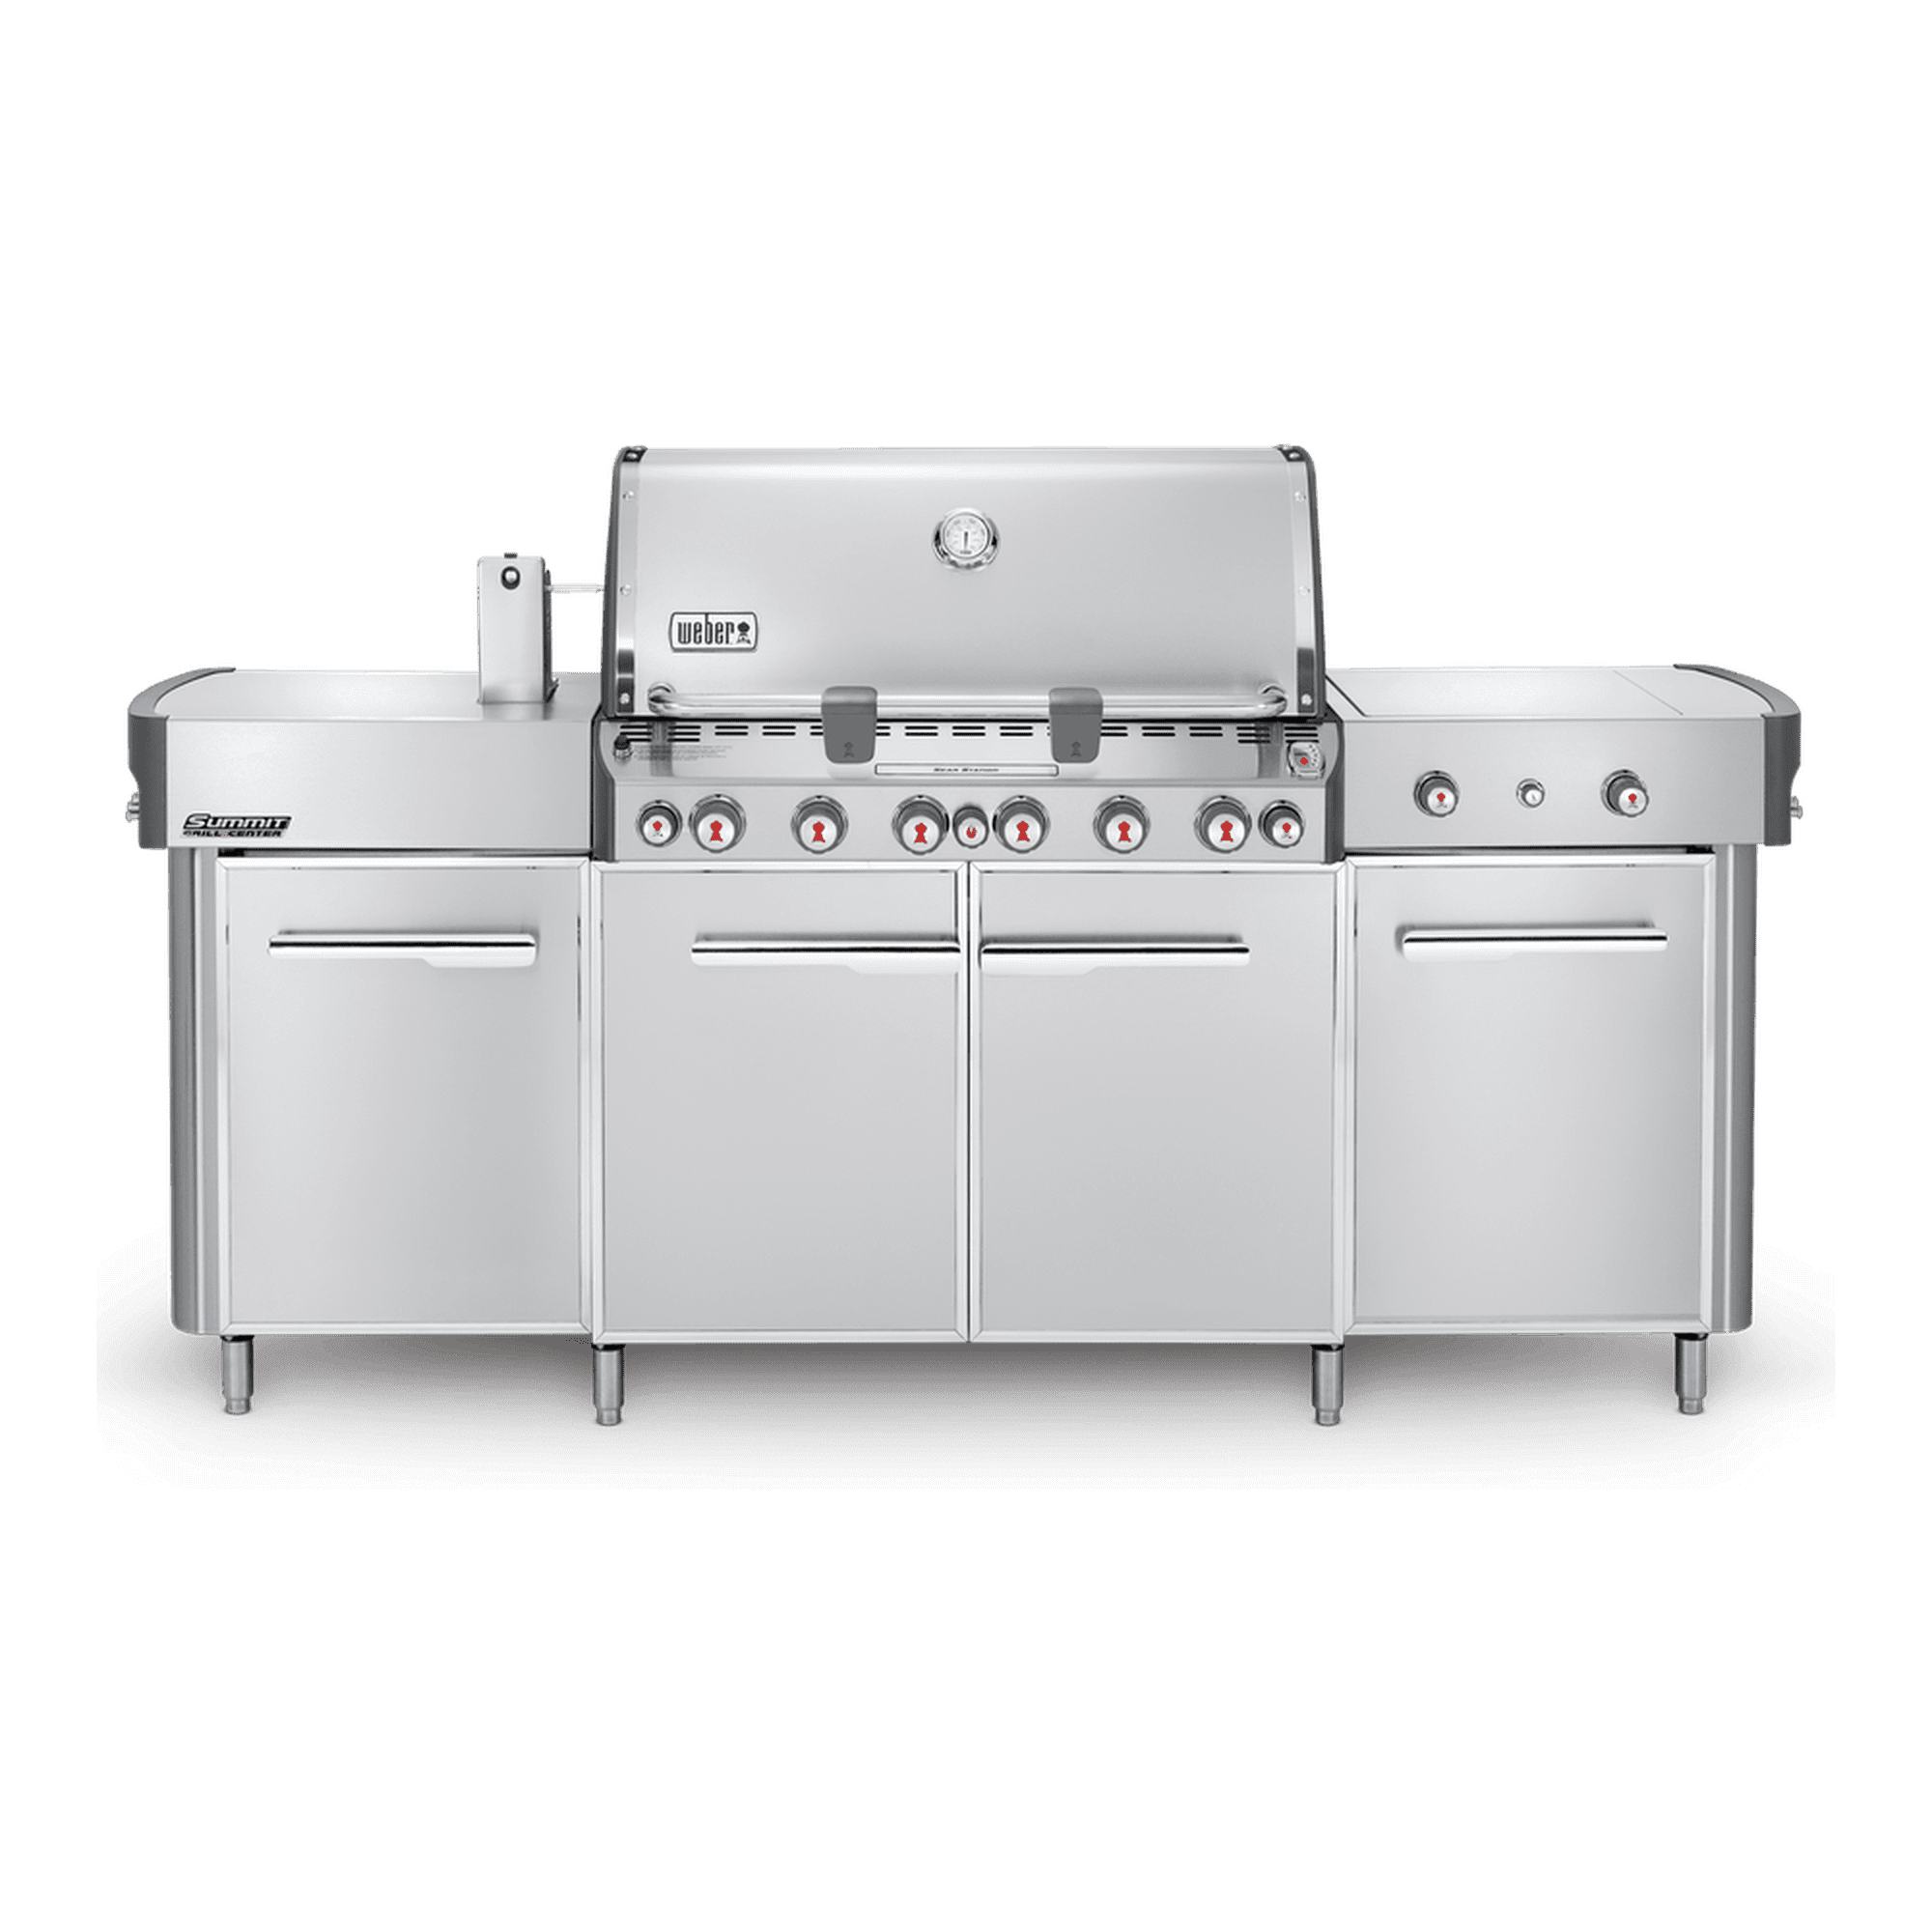 Weber (291001) Summit Grill Center Propane Gas Grill With Rotisserie, Sear Burner & Side Burner